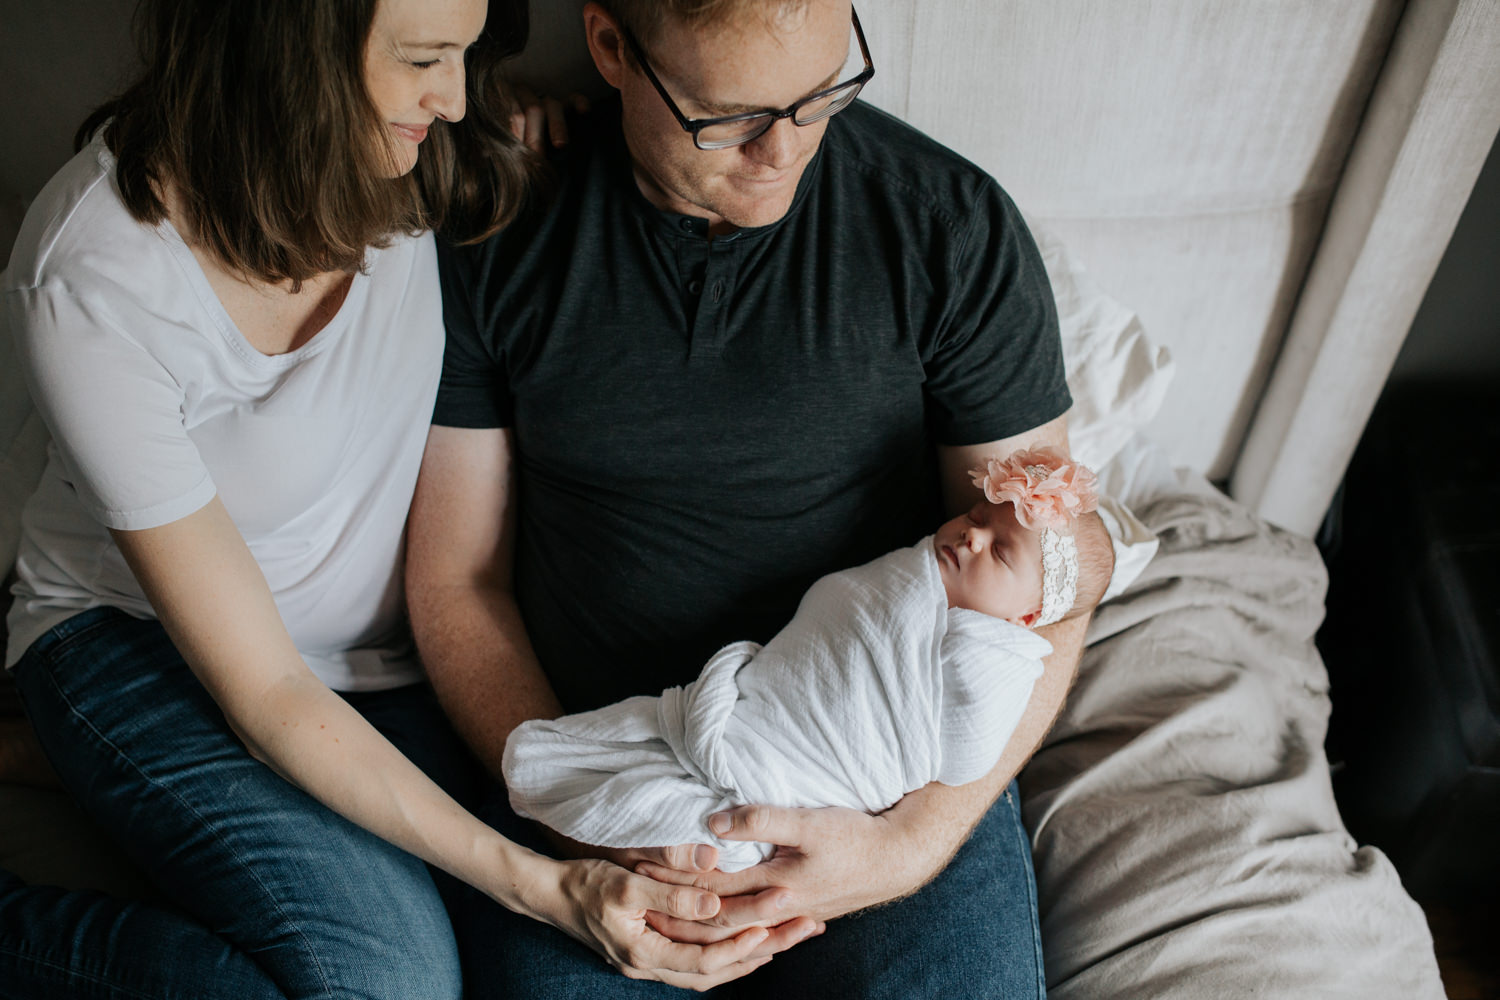 family of 3, new parents sitting on bed, dad holding 2 week old swaddled baby girl as mom snuggles next to husband smiling at daughter - GTA Lifestyle Photography